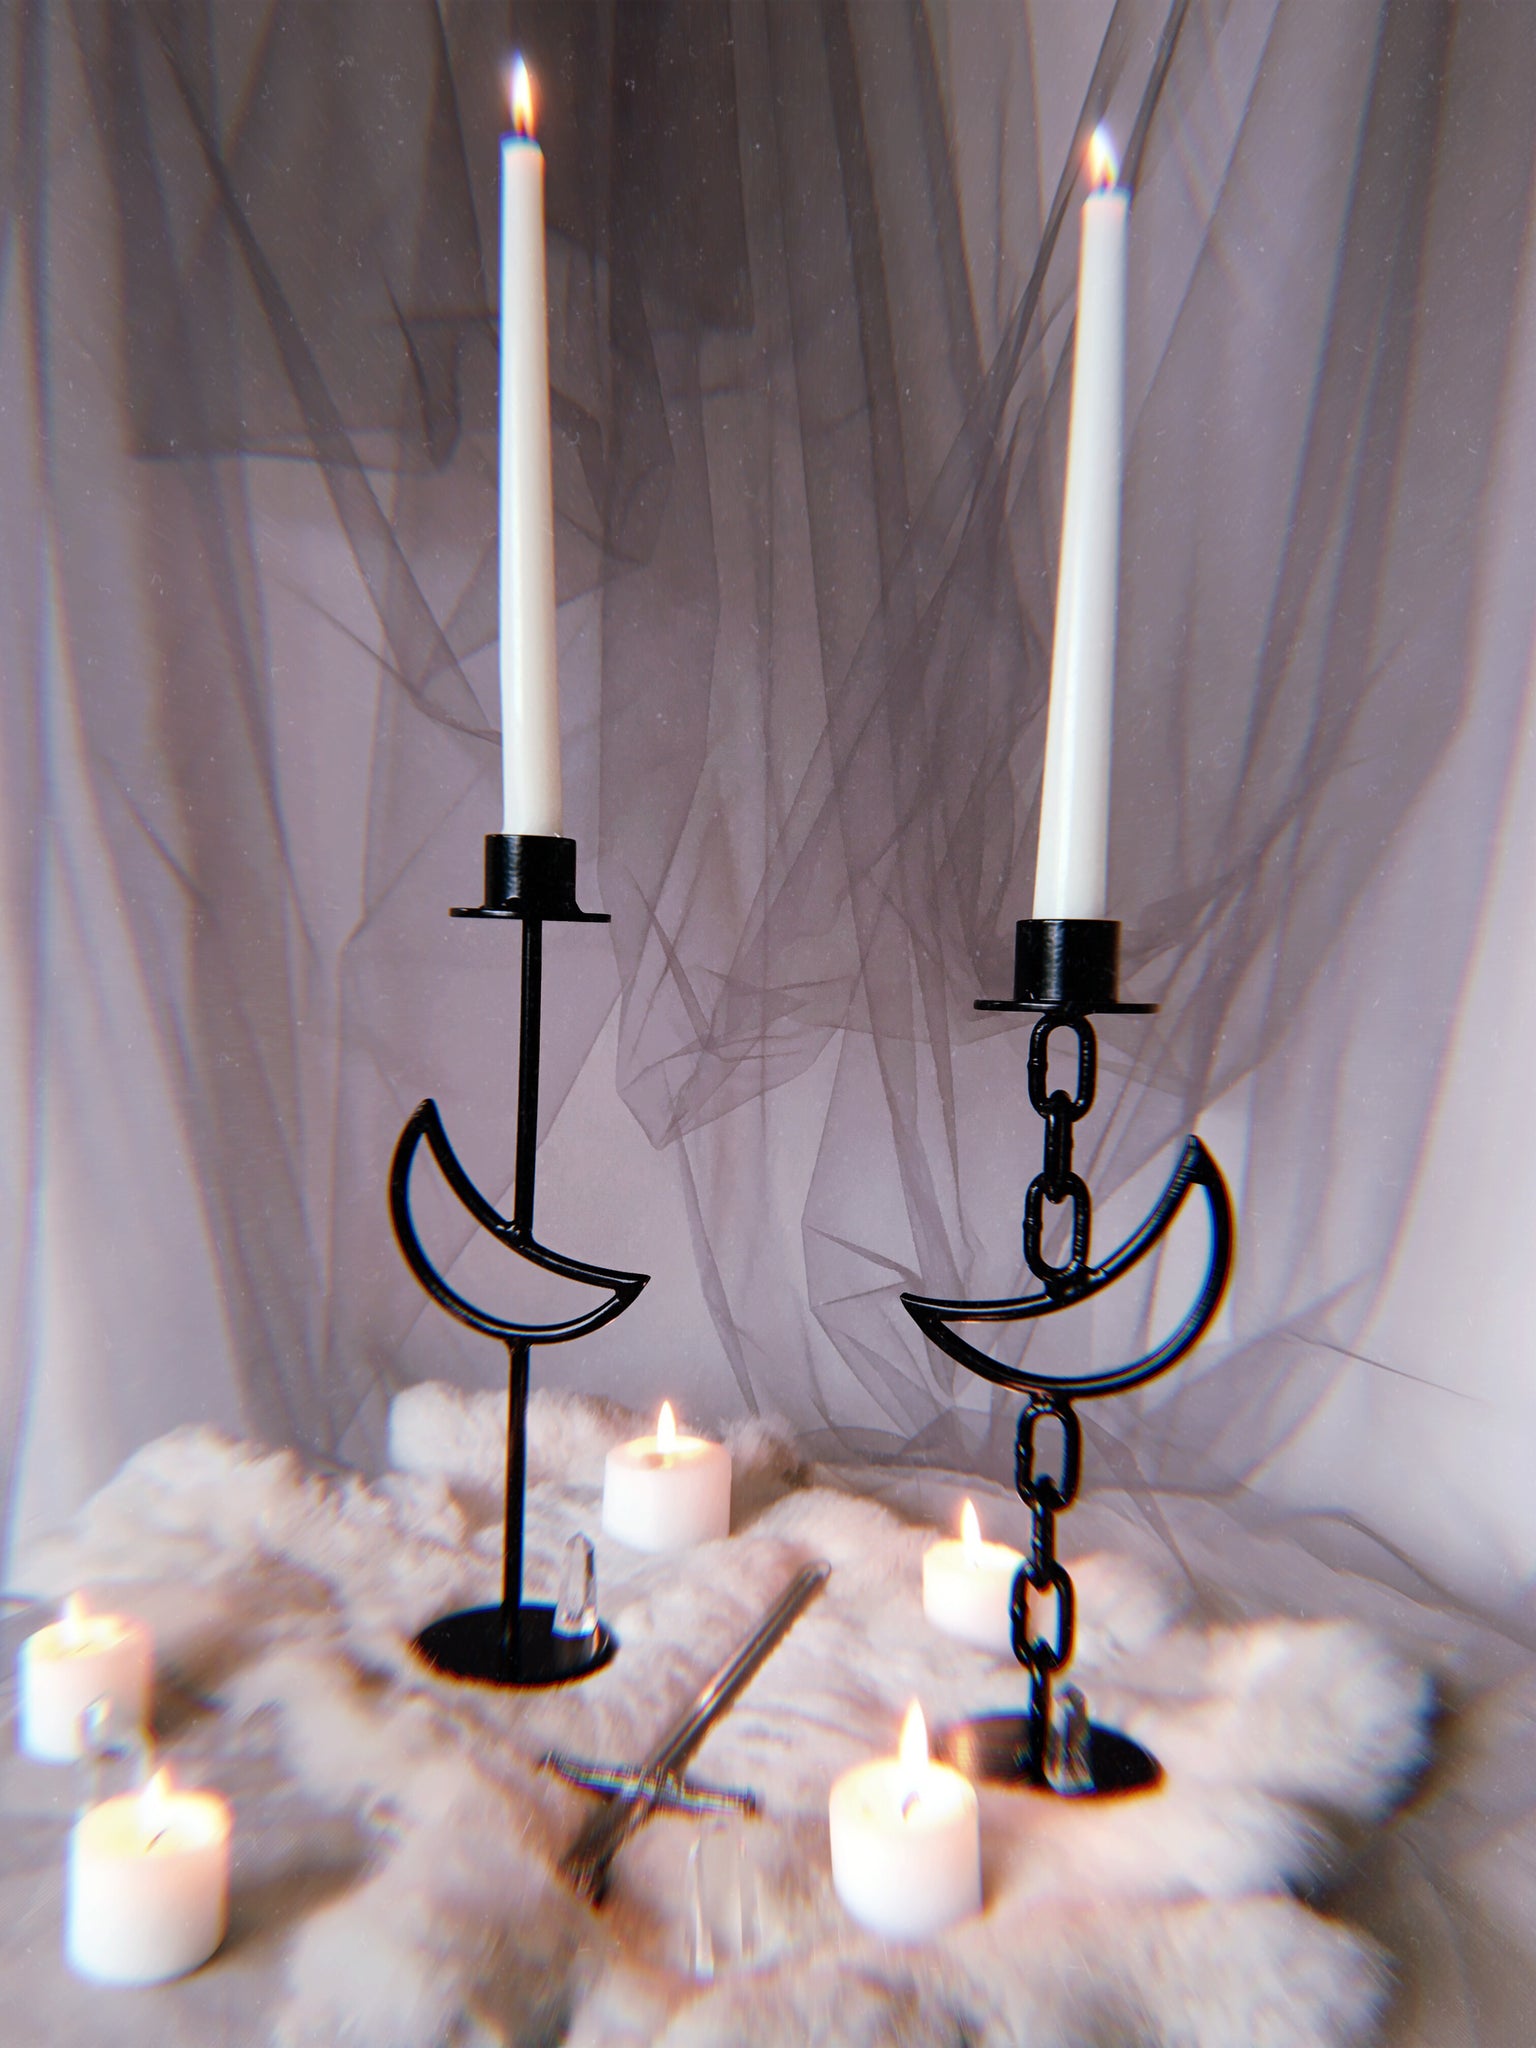 Lunar Candlesticks in classic and chain version in black